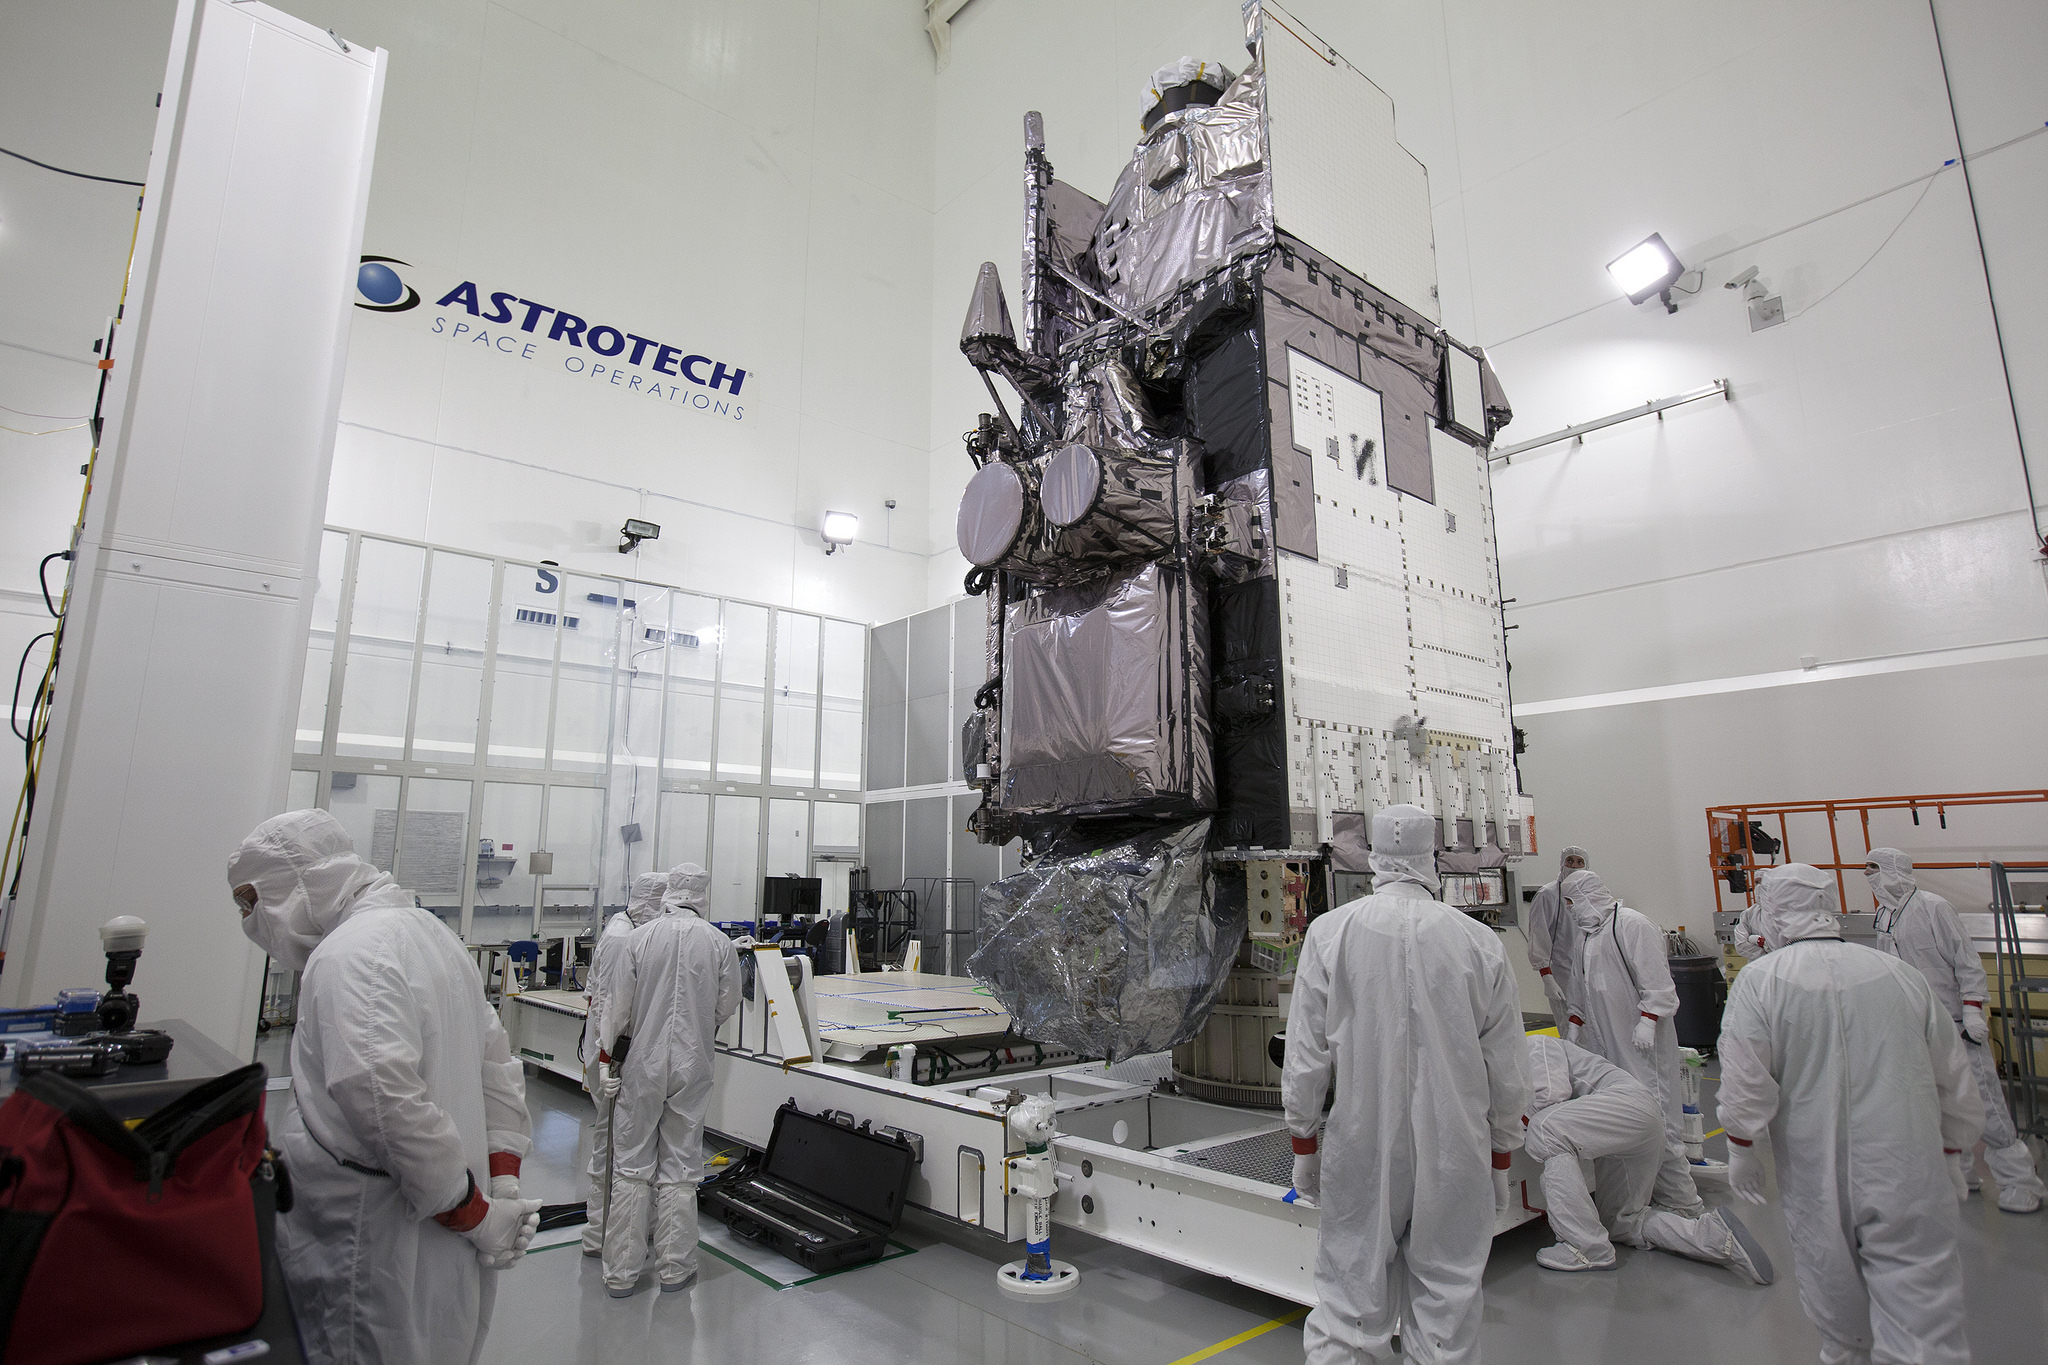 The GOES-R spacecraft is prepared for its 19 November 2016 launch. Photo Credit: NASA